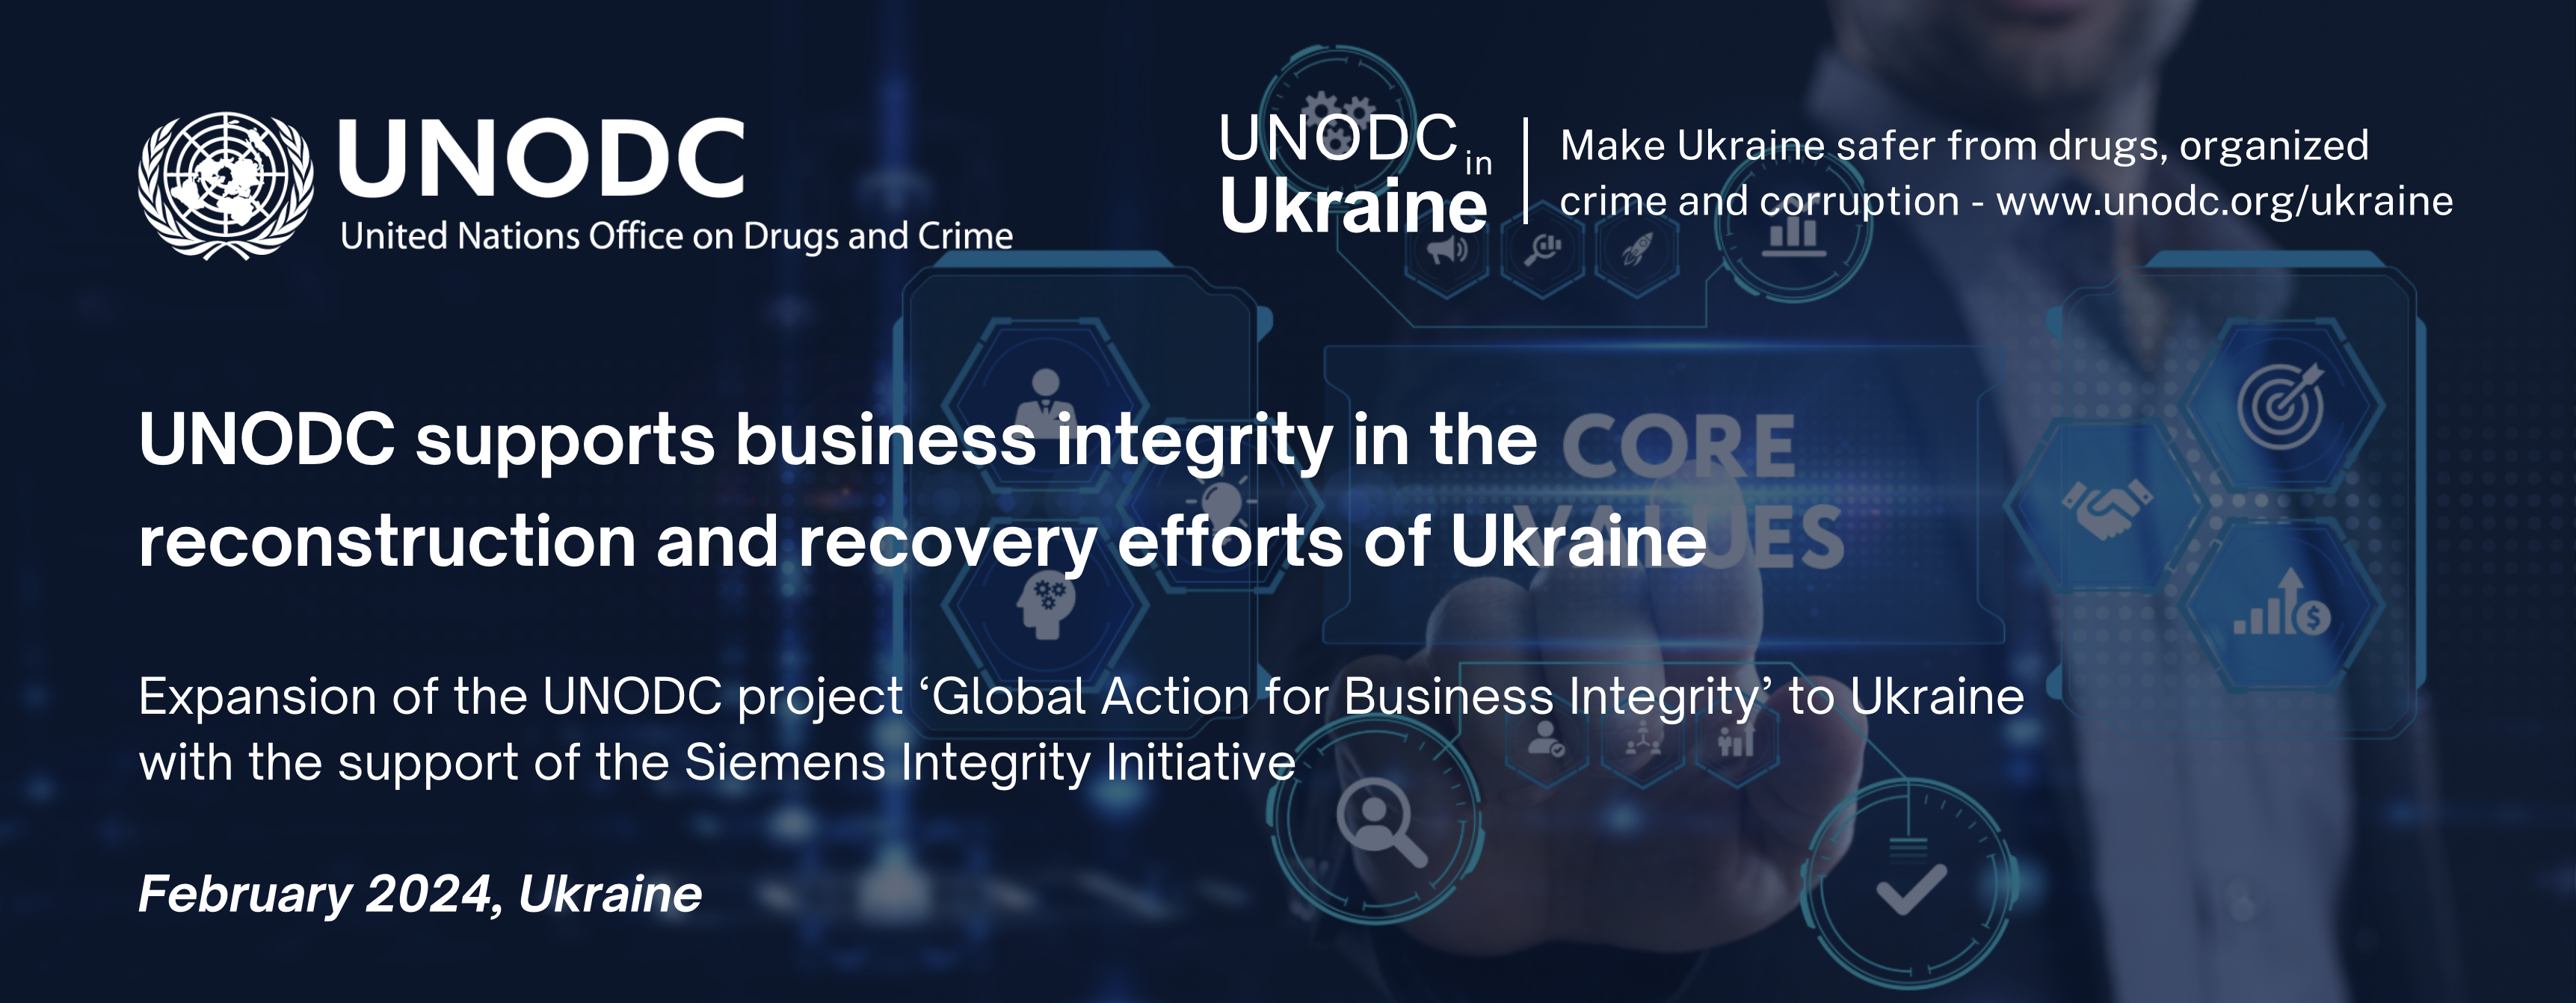 UNODC supports business integrity in the reconstruction and recovery efforts of Ukraine: Expansion of the UNODC project ‘Global Action for Business Integrity to Ukraine’ with the support of the Siemens Integrity Initiative 